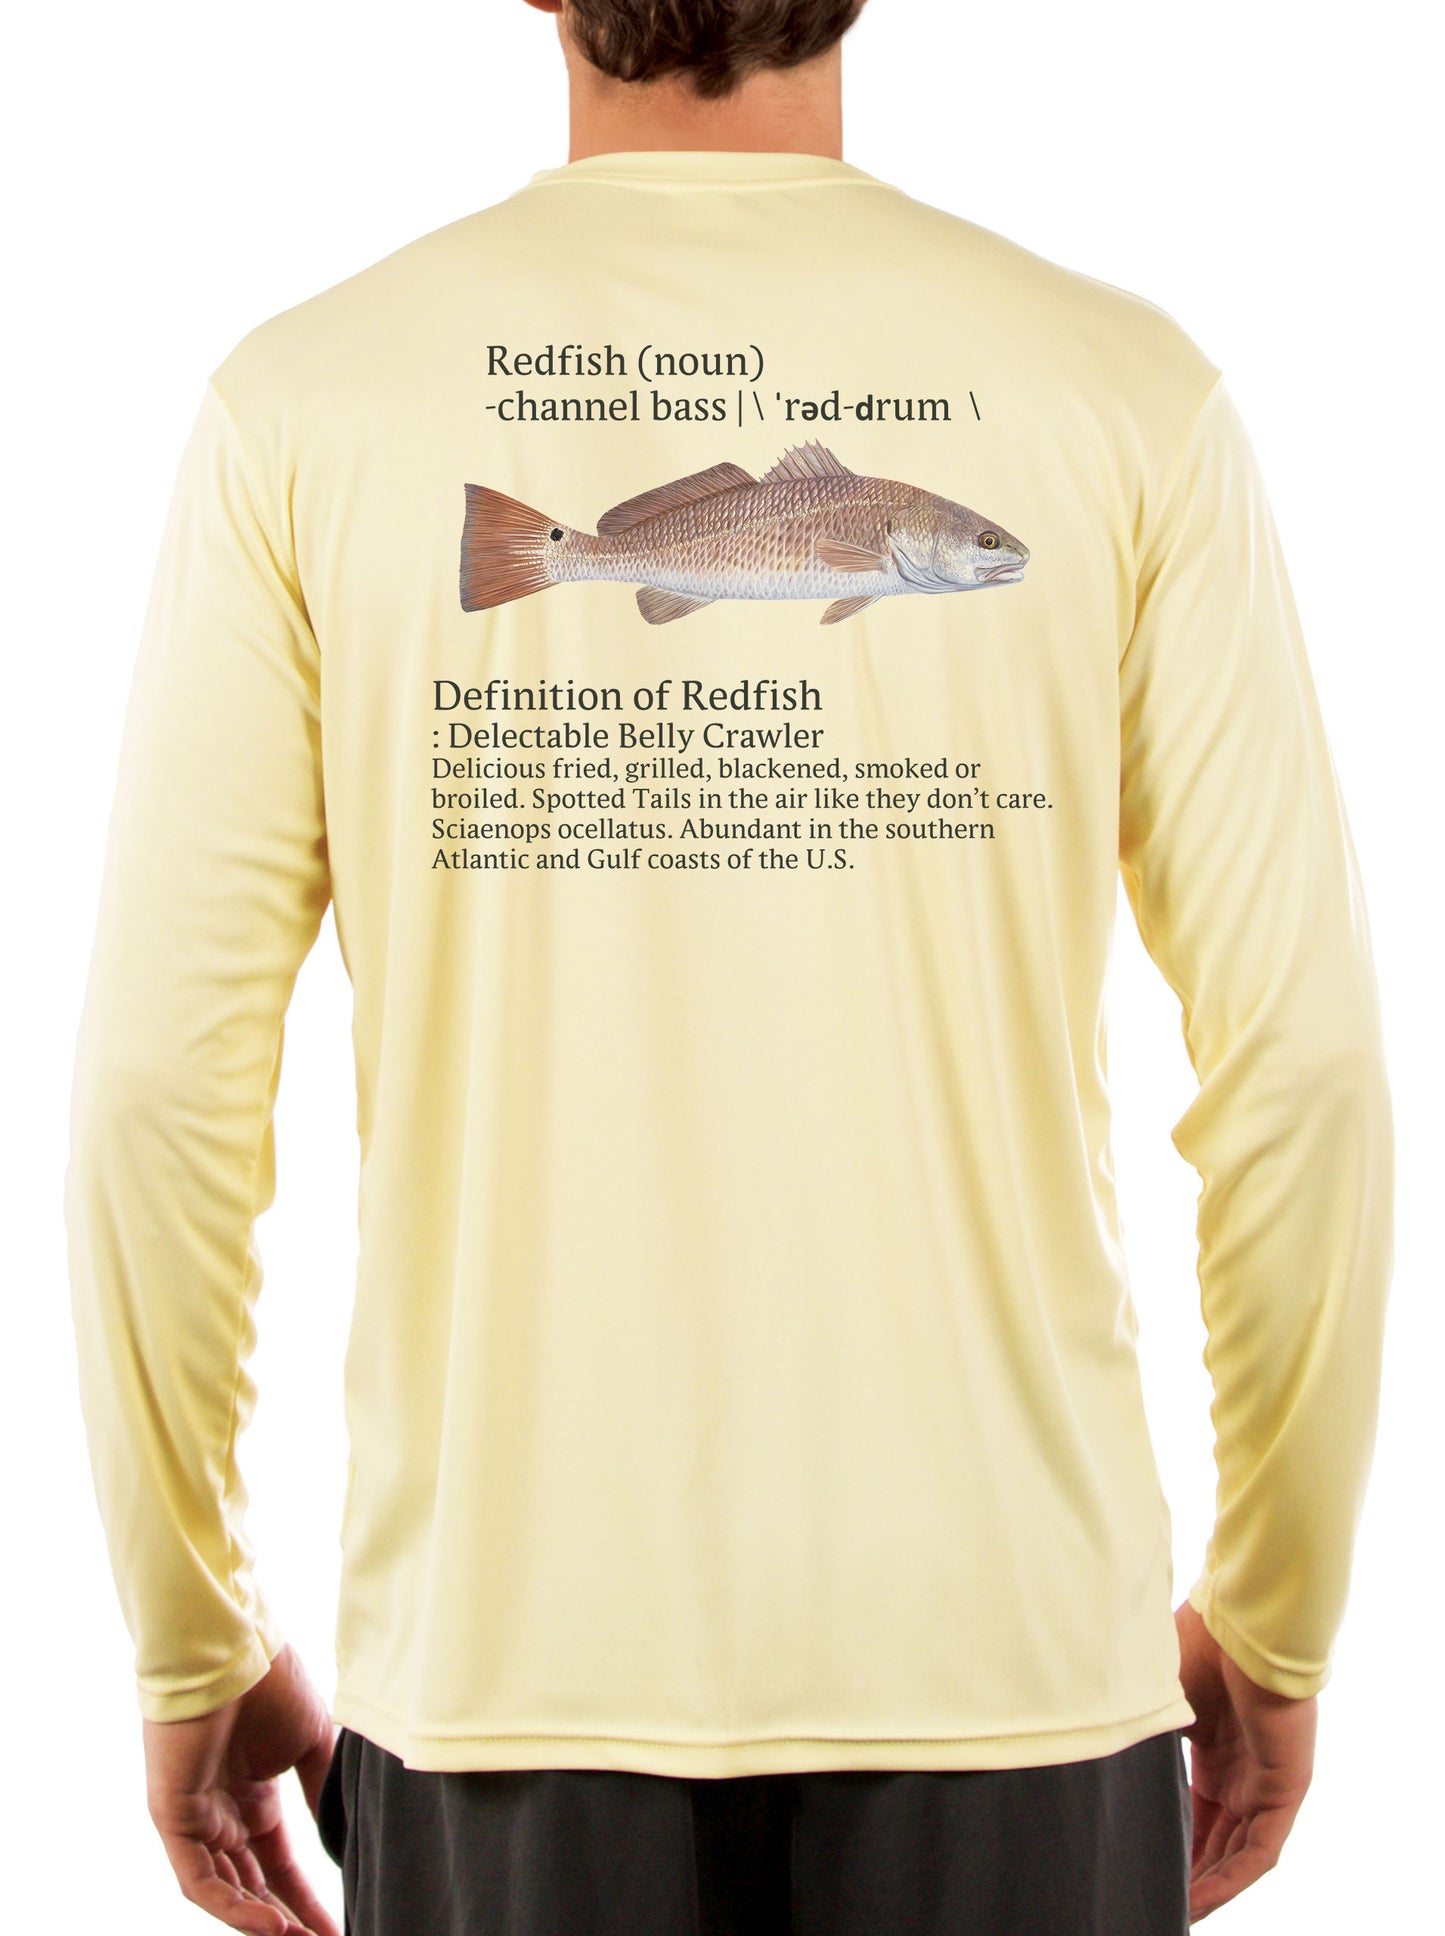 Redfish Fishing Shirts for Men Red Drum Channel Bass - UV Protected +50 Sun Protection with Moisture Wicking Technology - Skiff Life